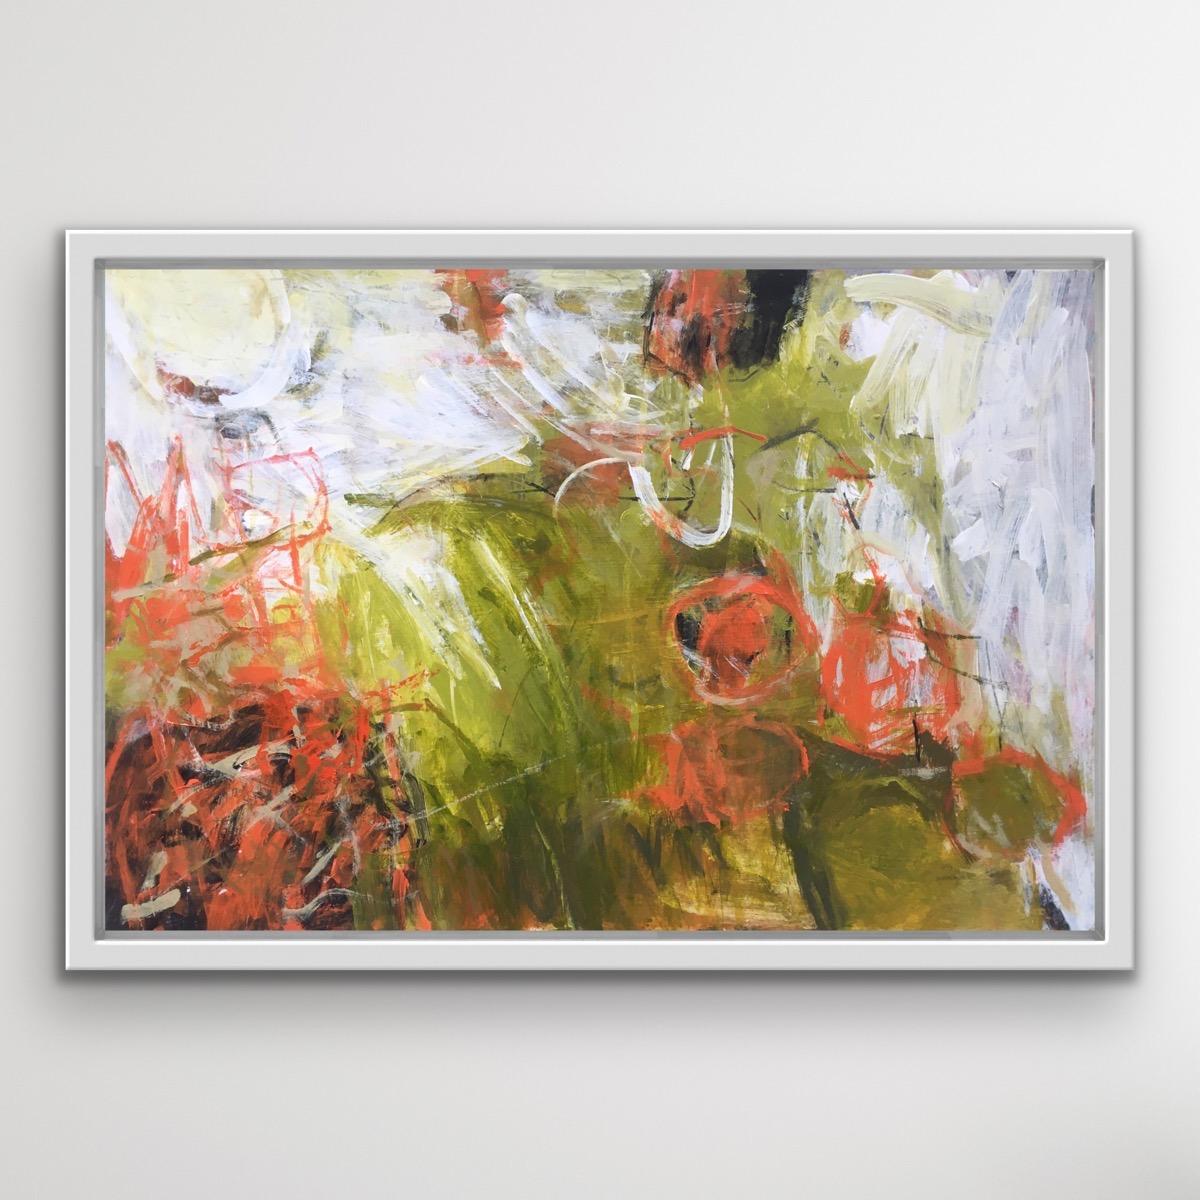 Warm Garden is an original abstract and expressionist painting by Janet Keith. The painting is bright and energetic with vigorous brush strokes and a sense of movement. The colours are predominately bright orange and earthy green. To Janet, the